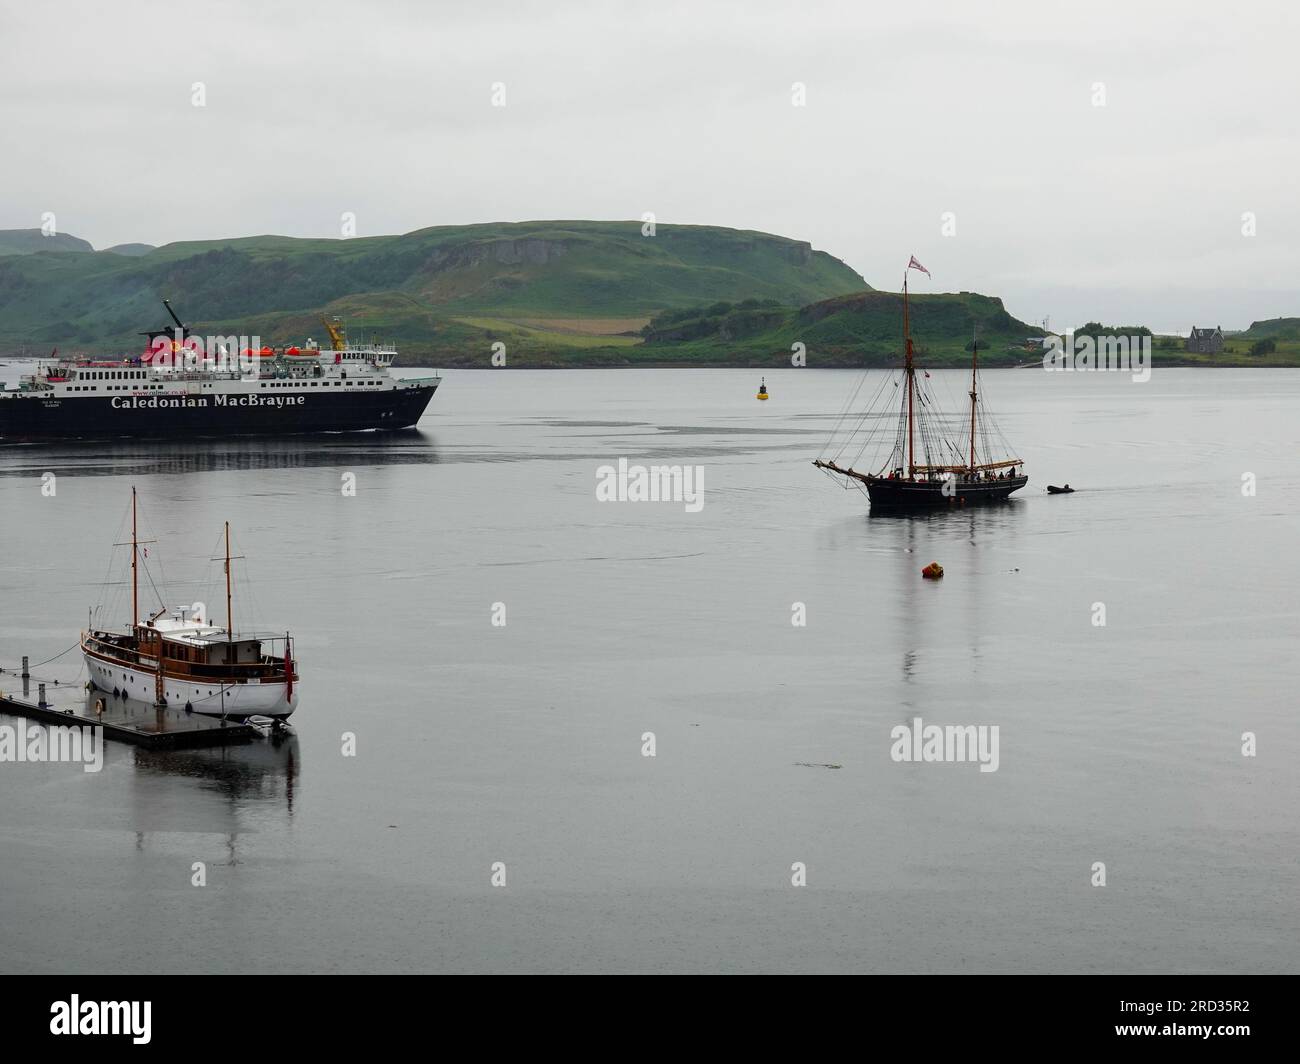 Assortment of boats in Oban Bay on a dreary June day, Scotland, UK. Stock Photo